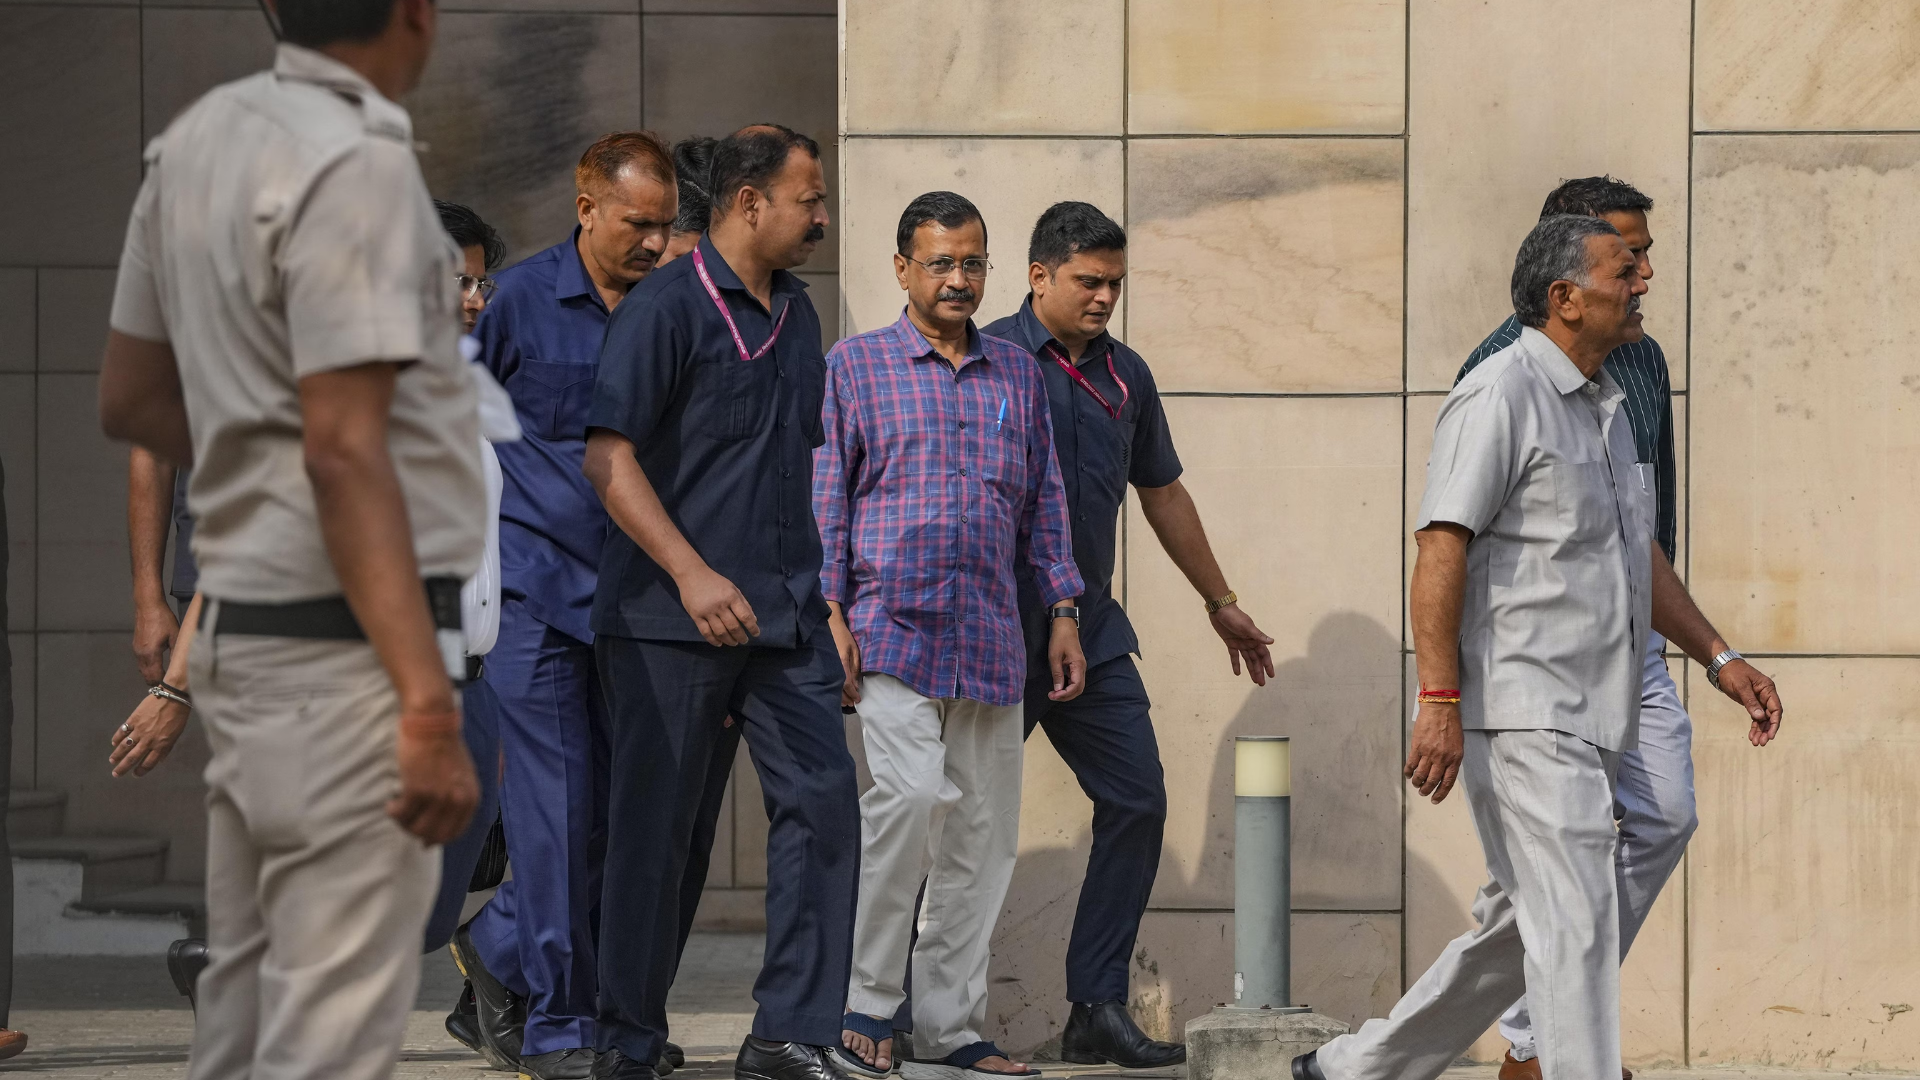 After 50 Days in Tihar Jail: Arvind Kejriwal's Message To The People